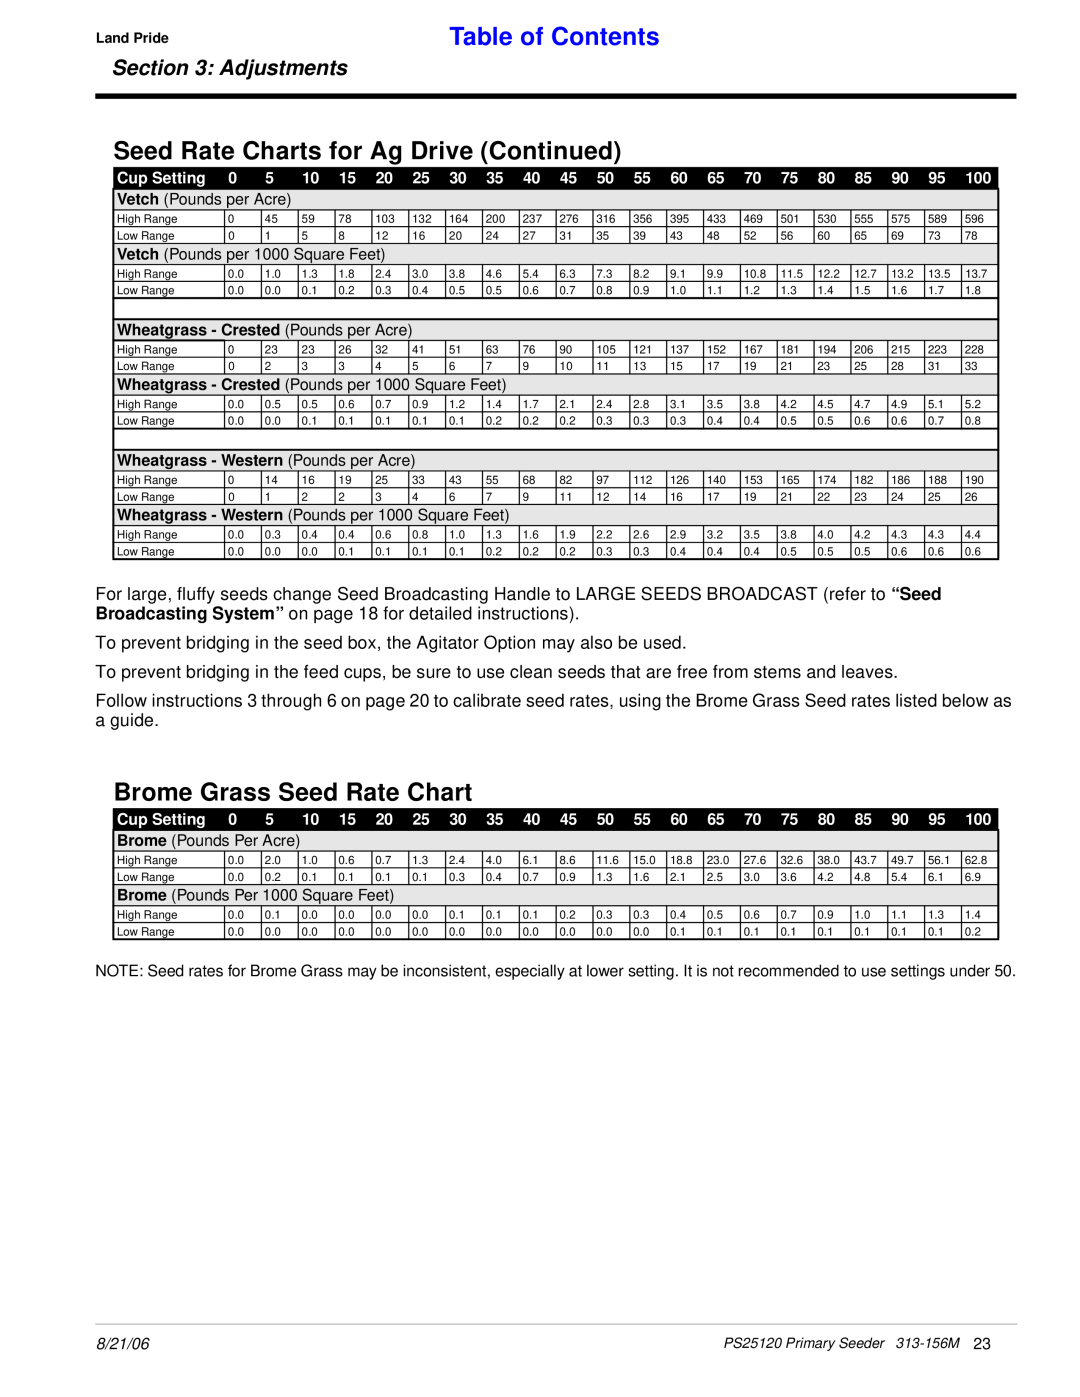 Land Pride PS25120 Brome Grass Seed Rate Chart, Seed Rate Charts for Ag Drive Continued, Table of Contents, Adjustments 